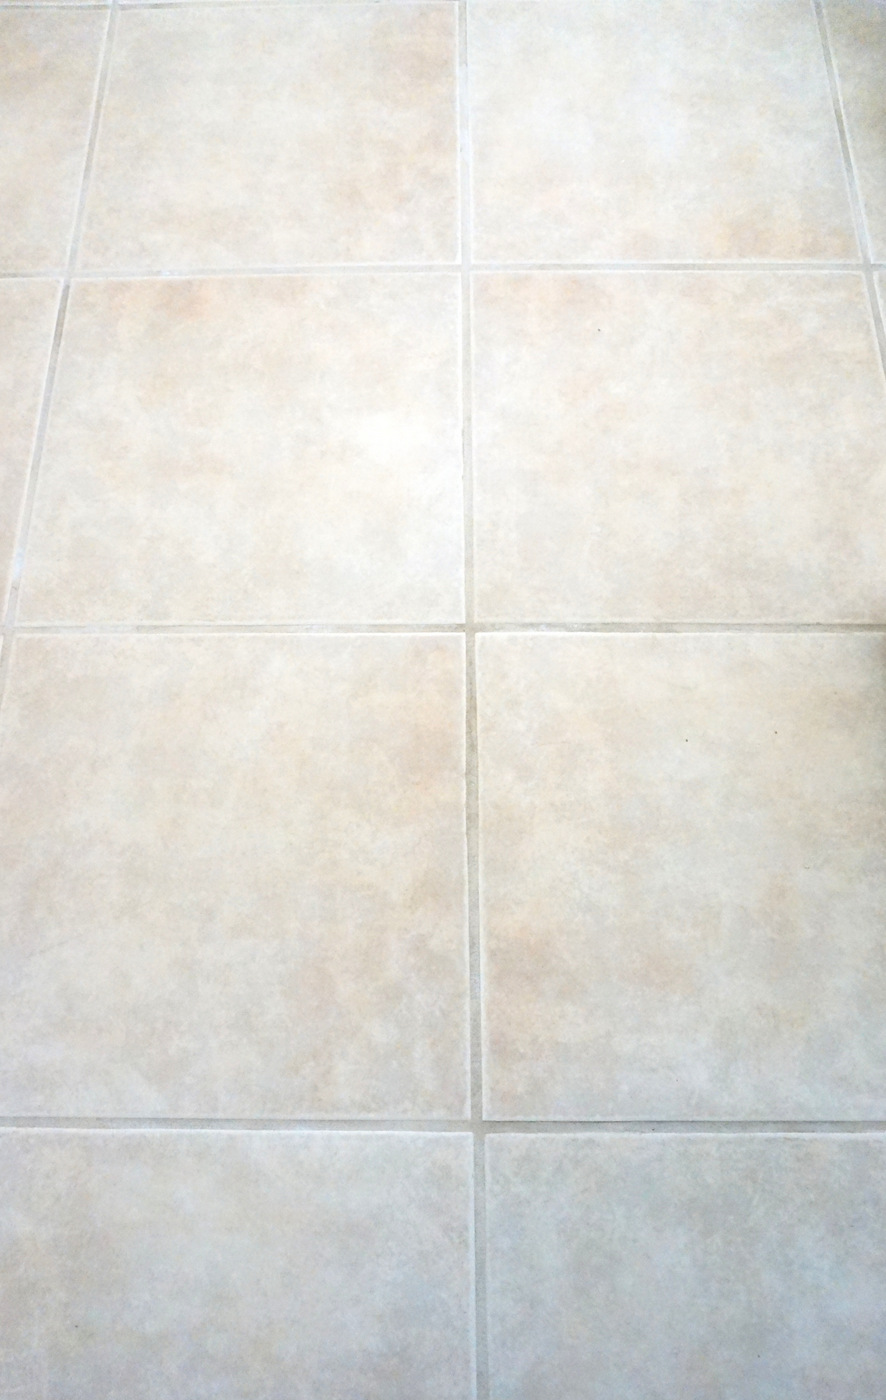 Does Cleaning Grout With Baking Soda, How To Clean Tile Floor Grout With Vinegar